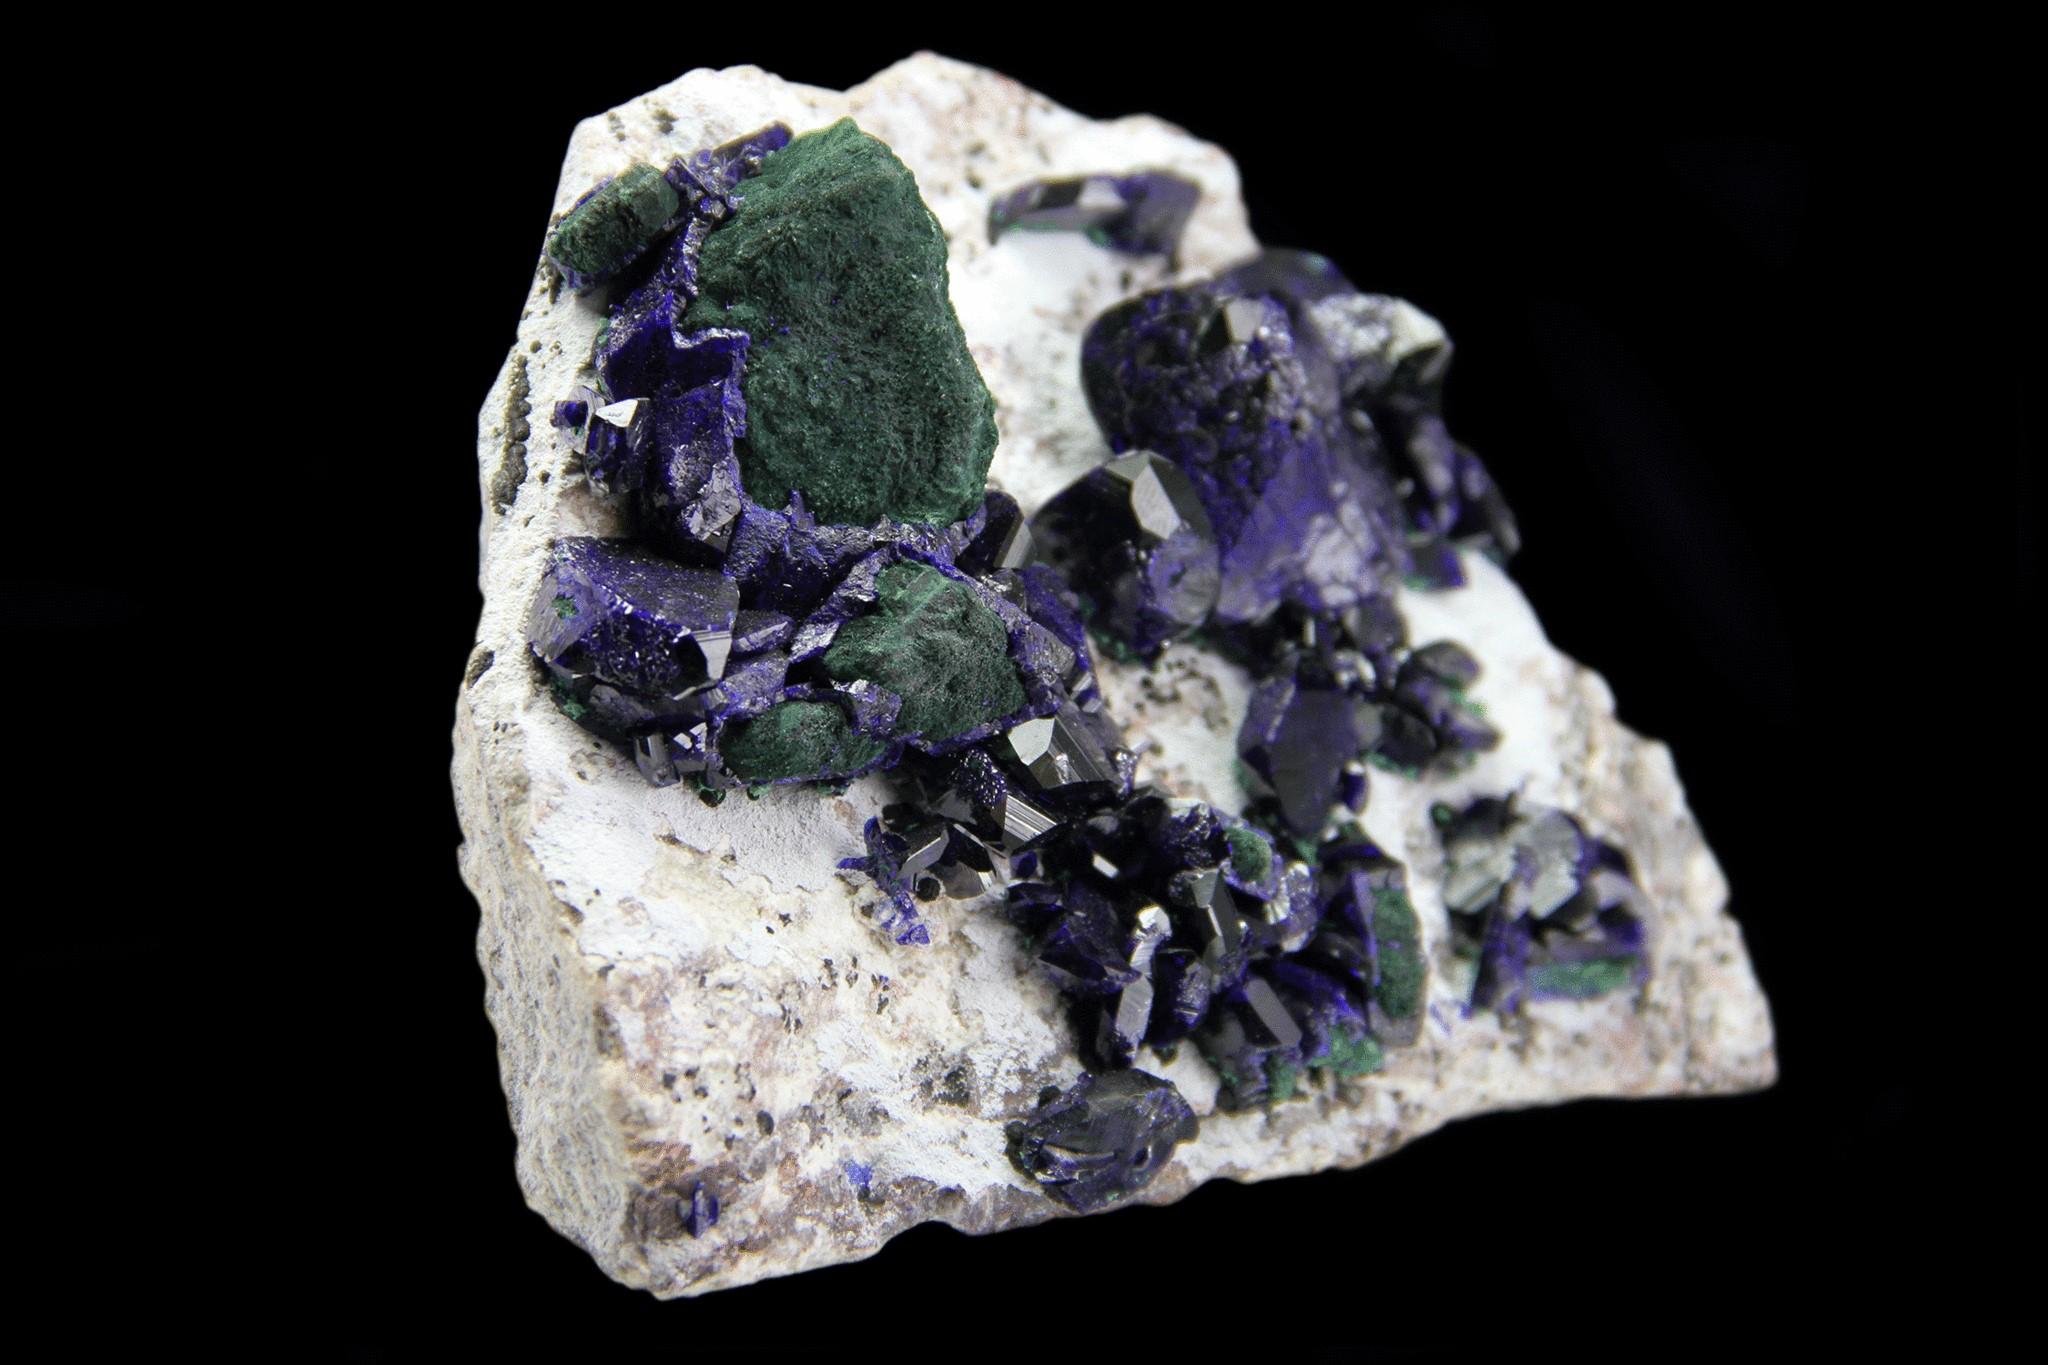 Crystal Azurite From Milpillas Mine, Cuitaca, Sonora, Mexico (374.3 grams) For Sale